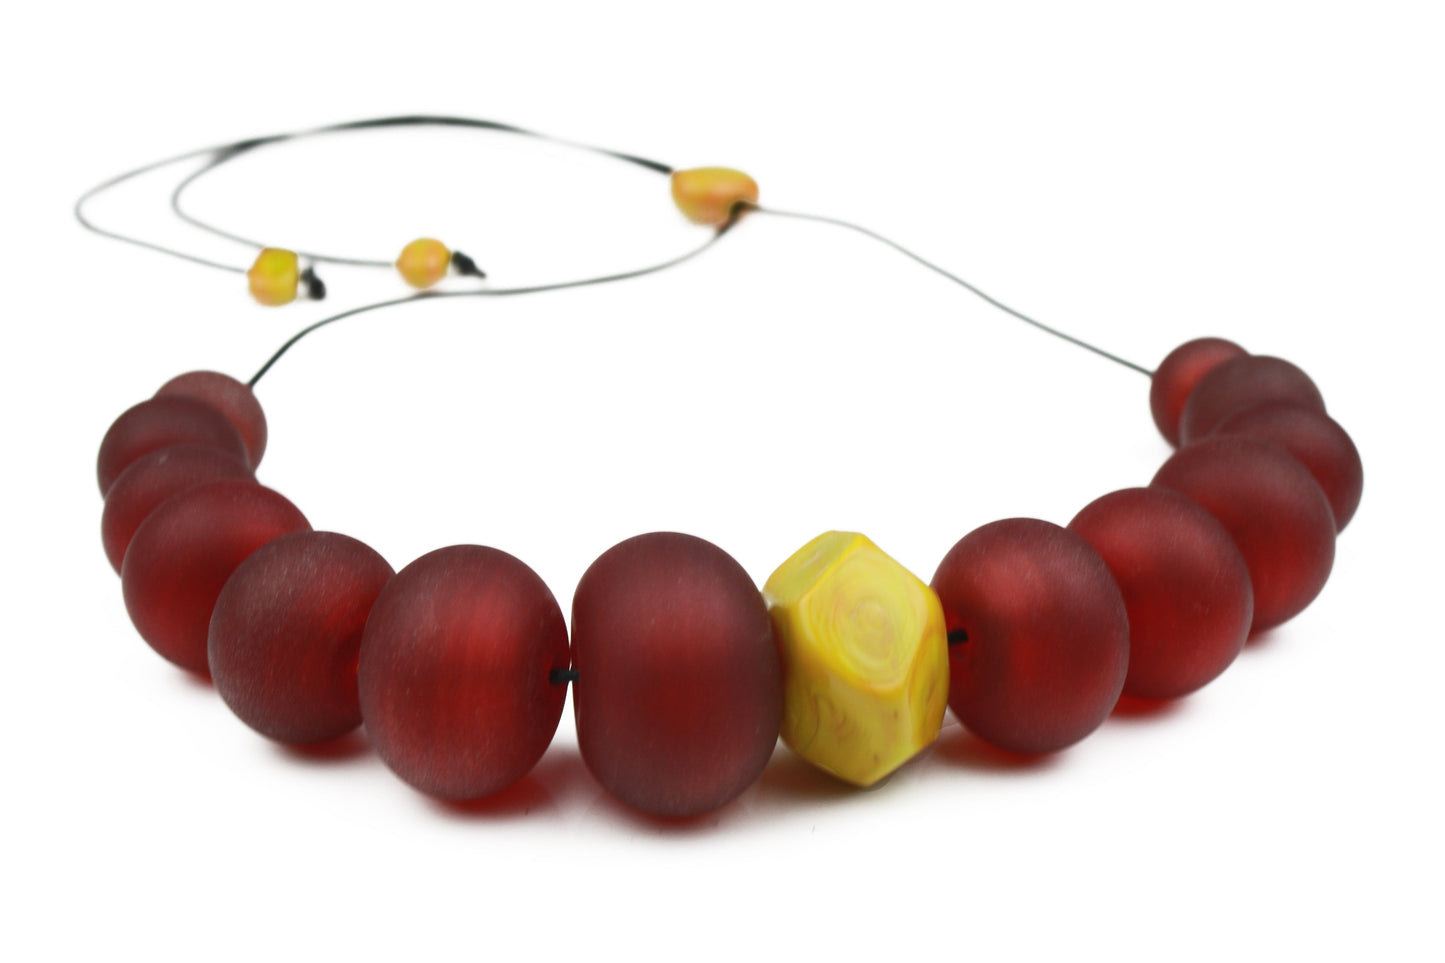 Necklace of hand blown and sandblasted hollow beads in rich deep red glass paired with a ochre yellow glass nugget bead and strung on adjustable leather